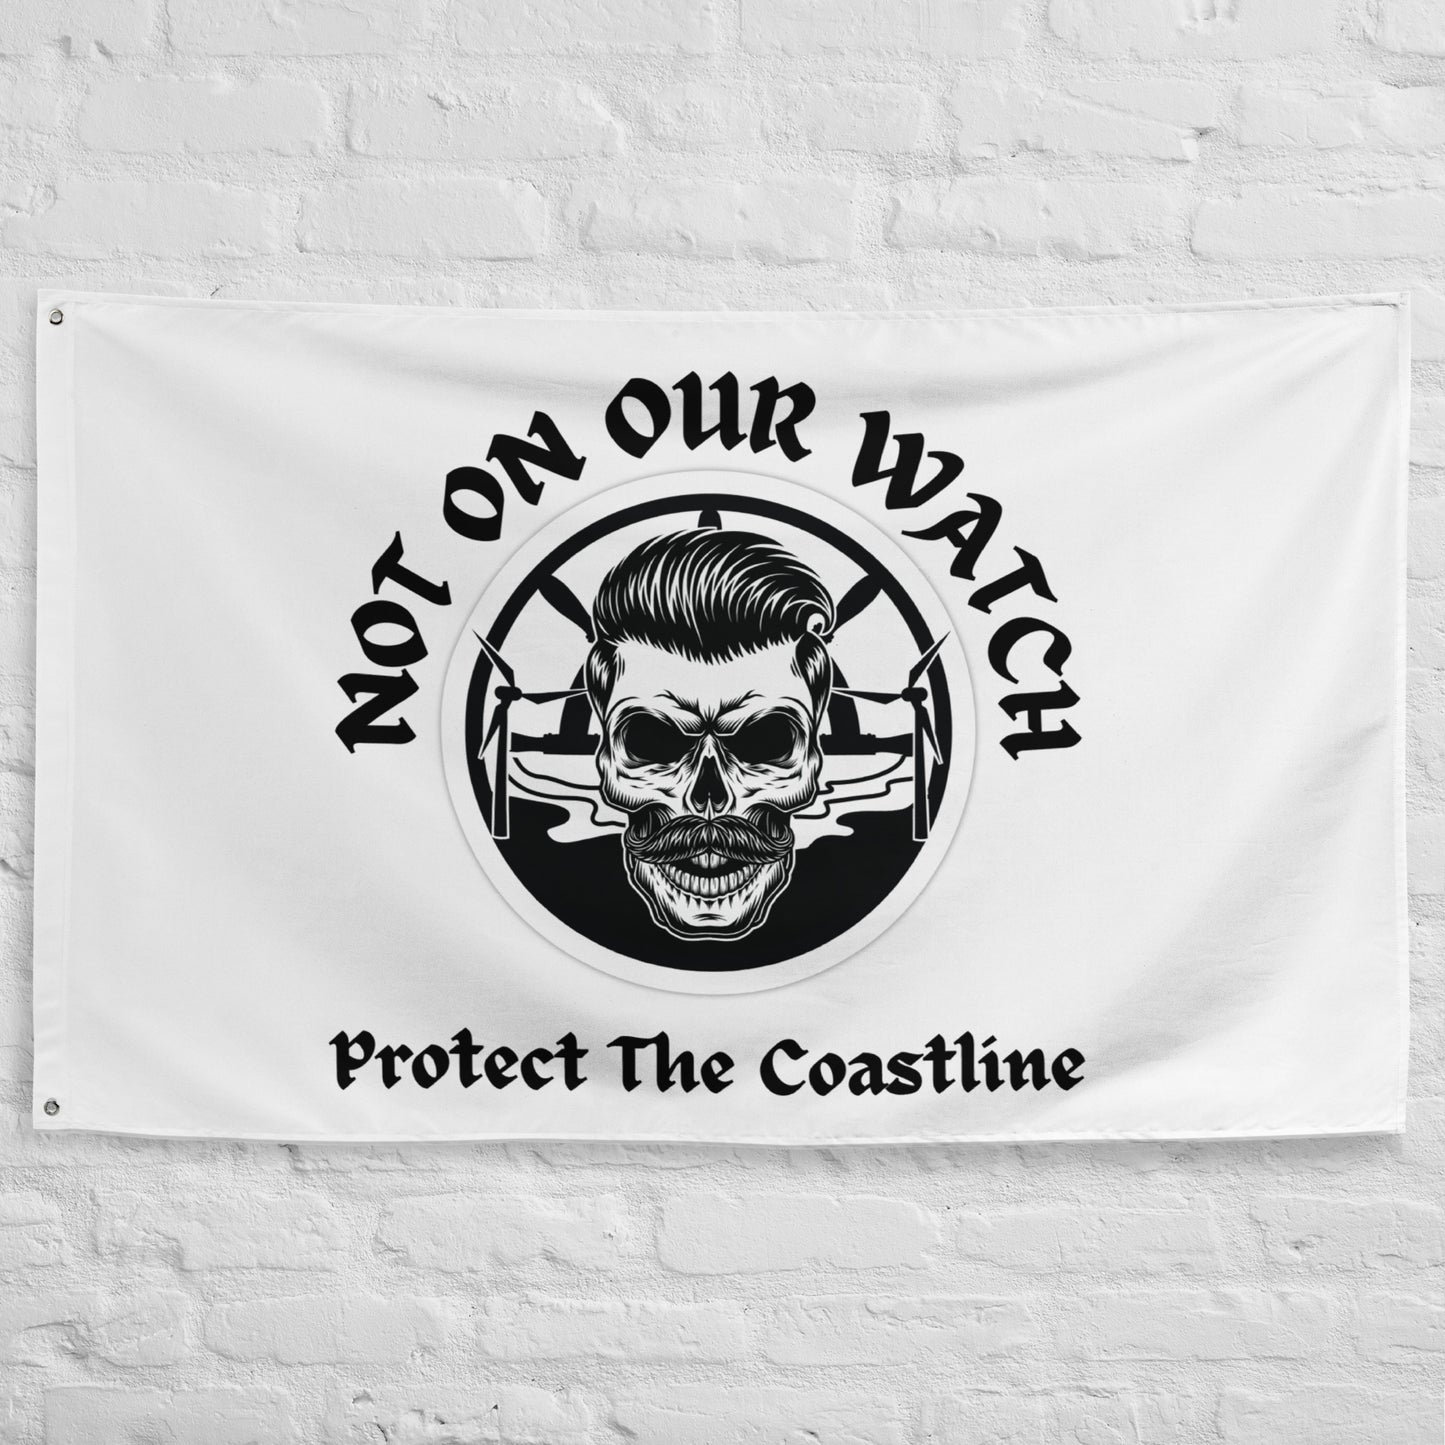 'Not on Our Watch" Stop Coastal Wind Farming Flag